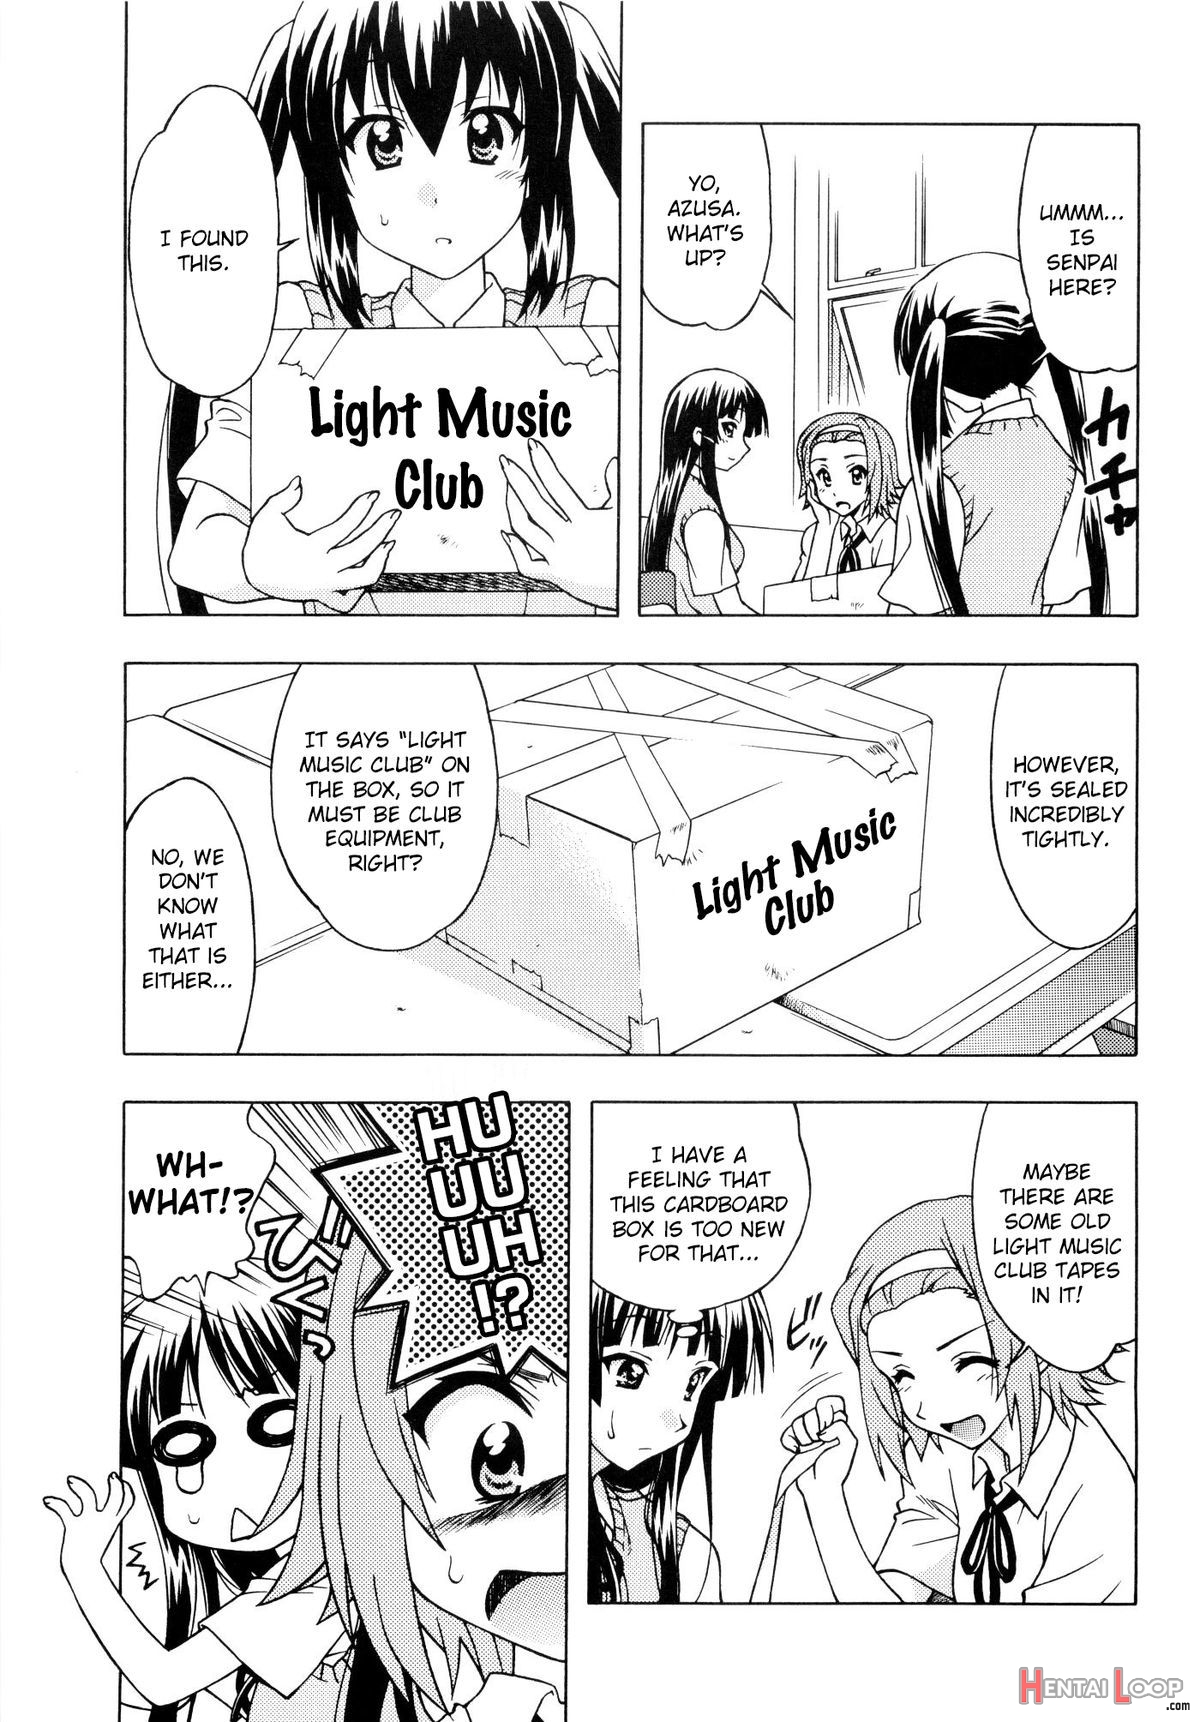 K-on! Box page 2